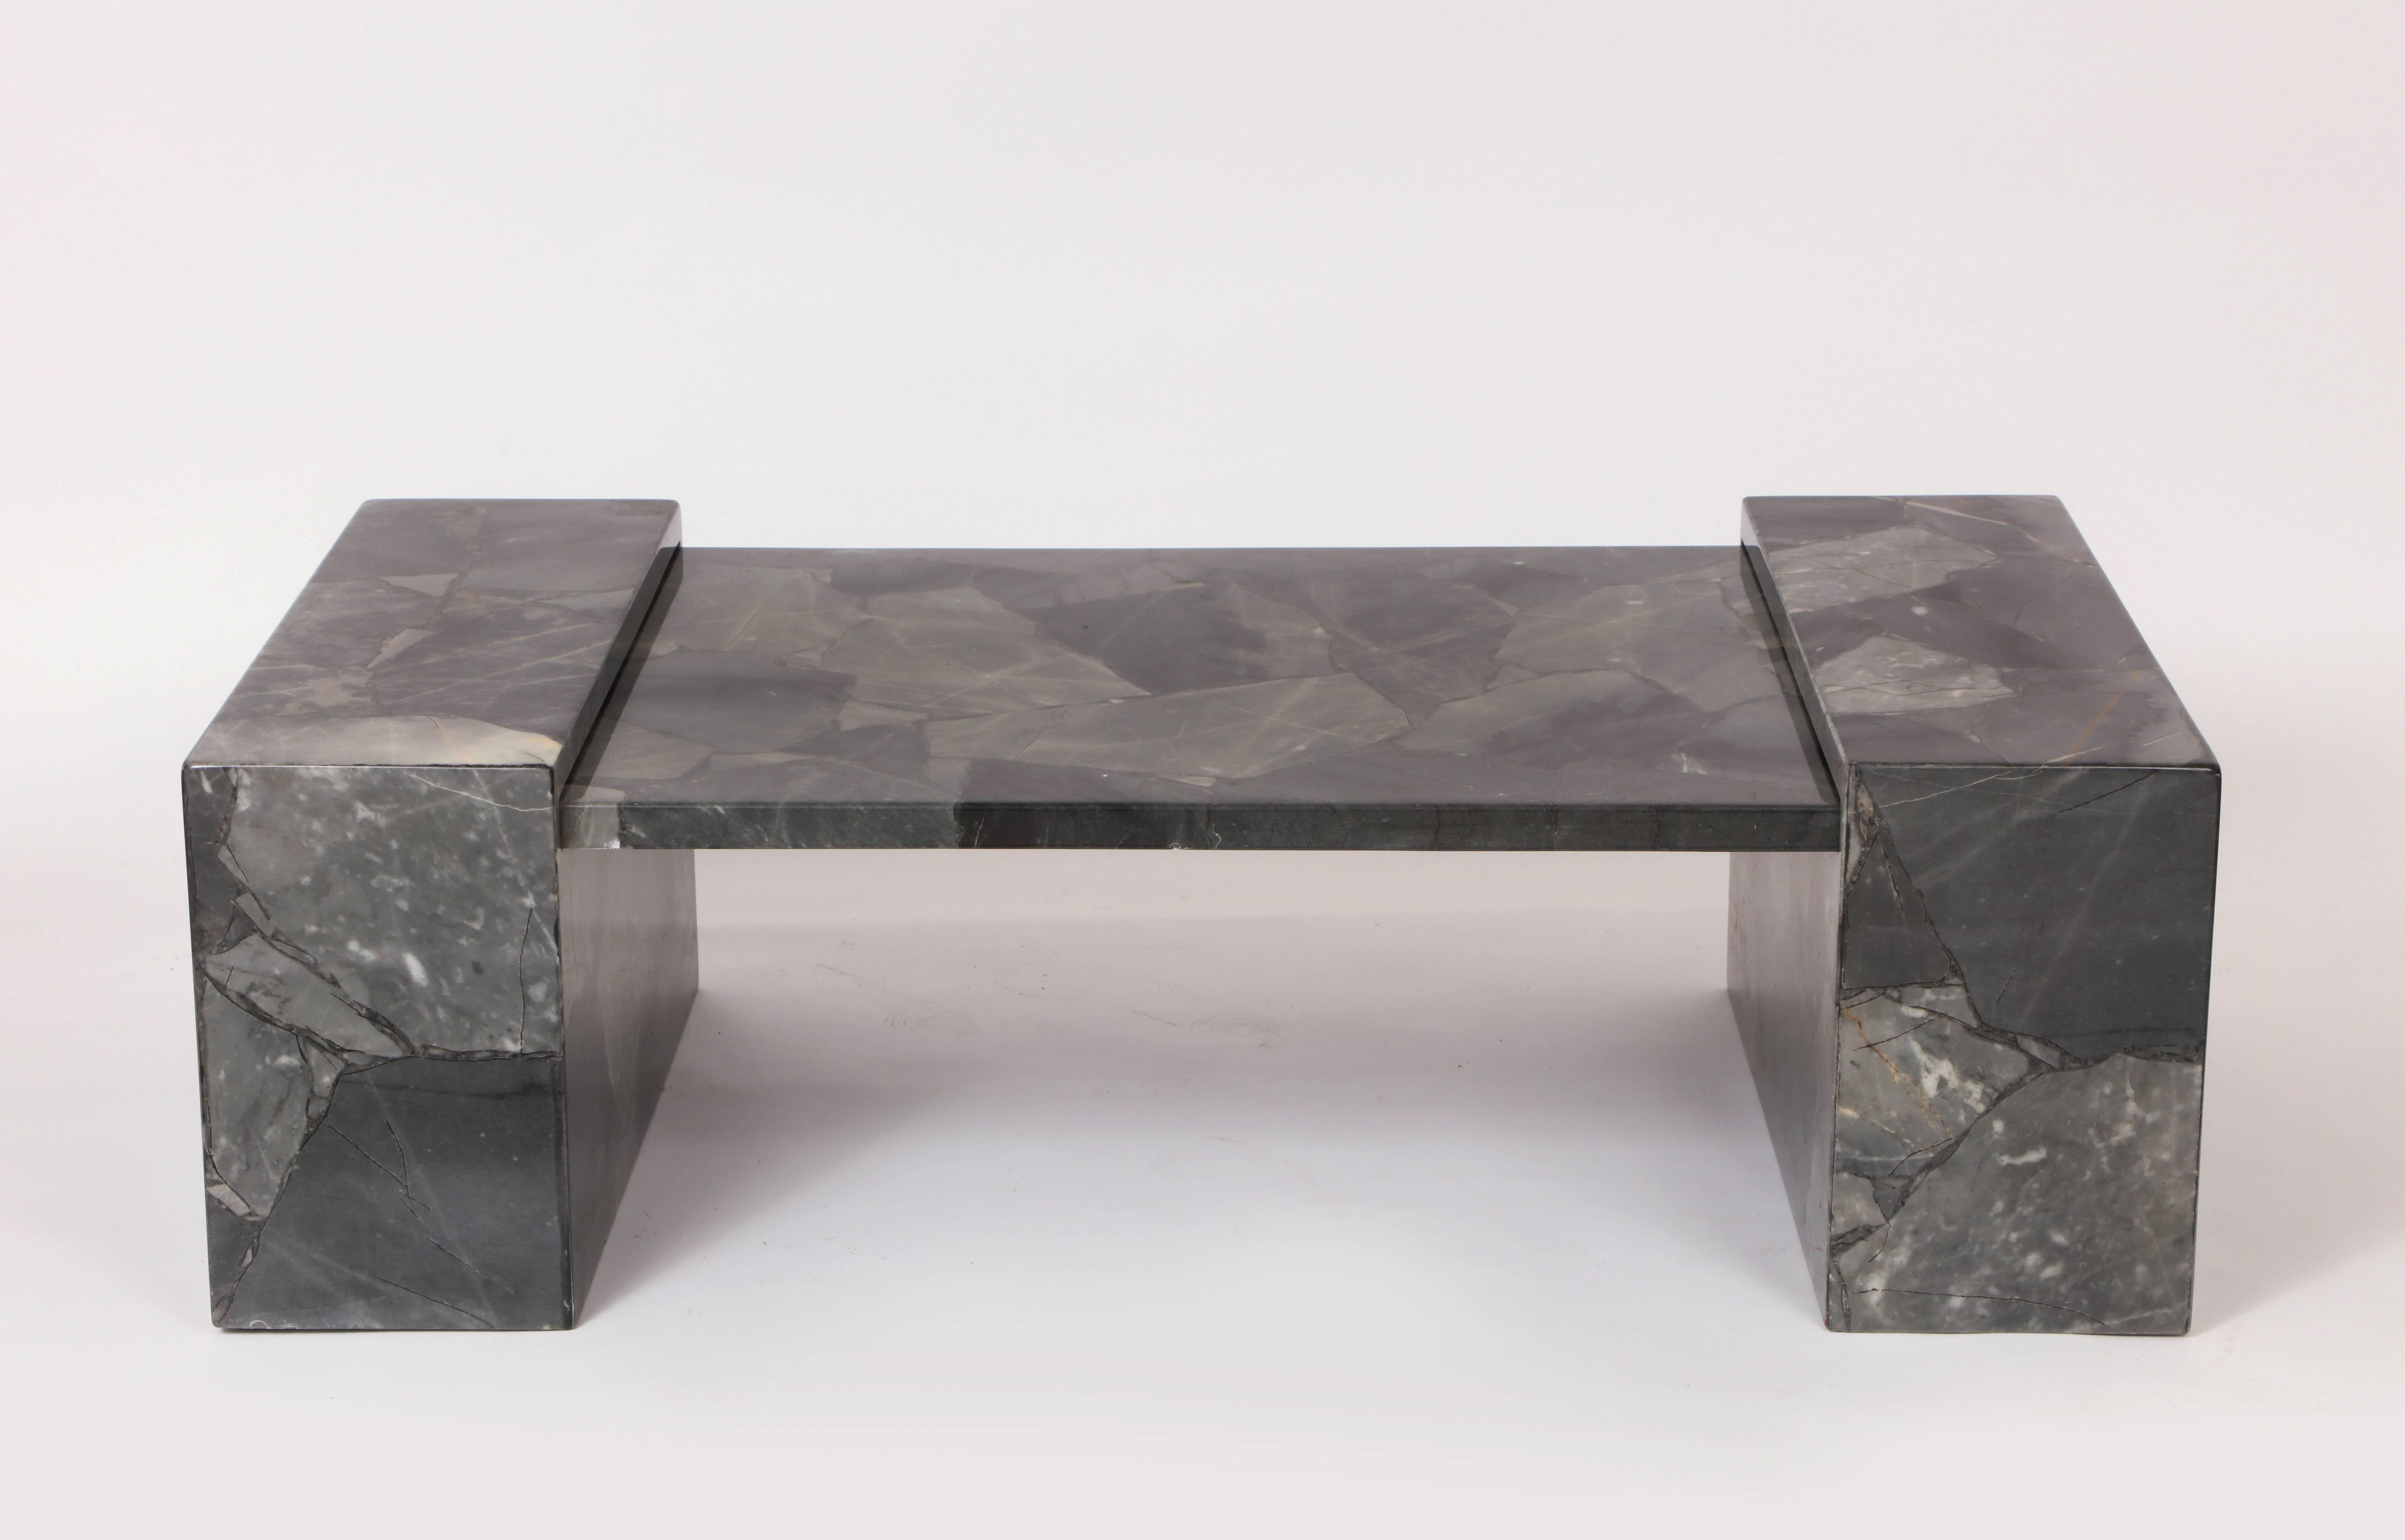 Muller faux marble stone coffee table hand-painted grey black, Mexico, 1970.

Heavy hand-painted faux marble table. Incredible workmanship.
Comes apart in three pieces. Signed by Artisan.
Measures:
48 inches wide.
27 inches deep.
16 inches